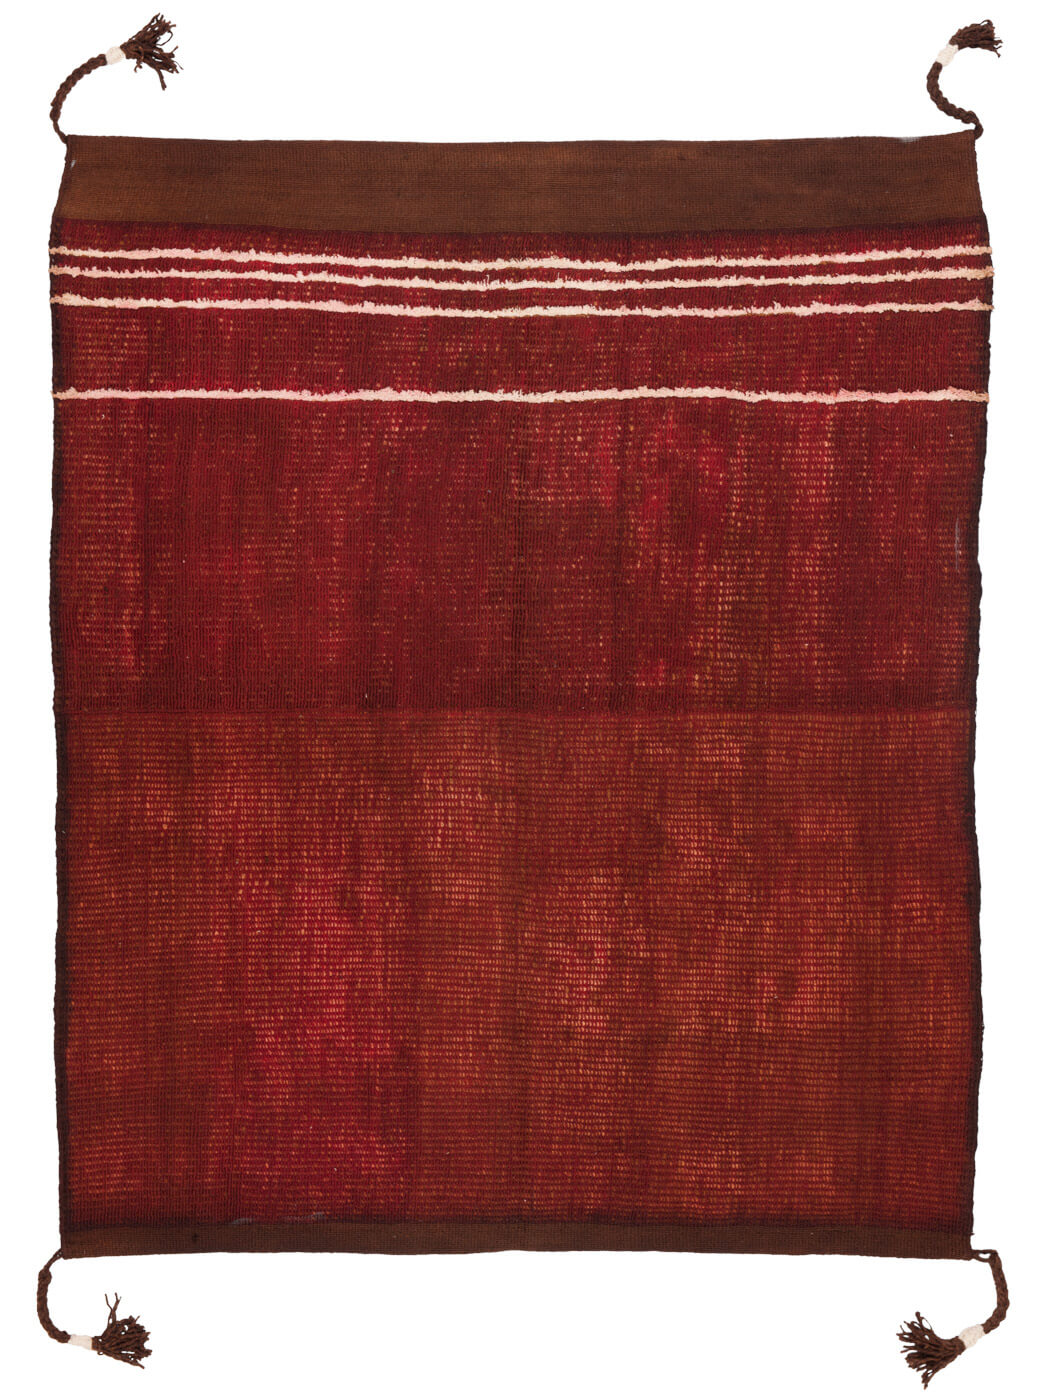 Tribal Red Hand-Woven Luxury Rug ☞ Size: 250 x 300 cm